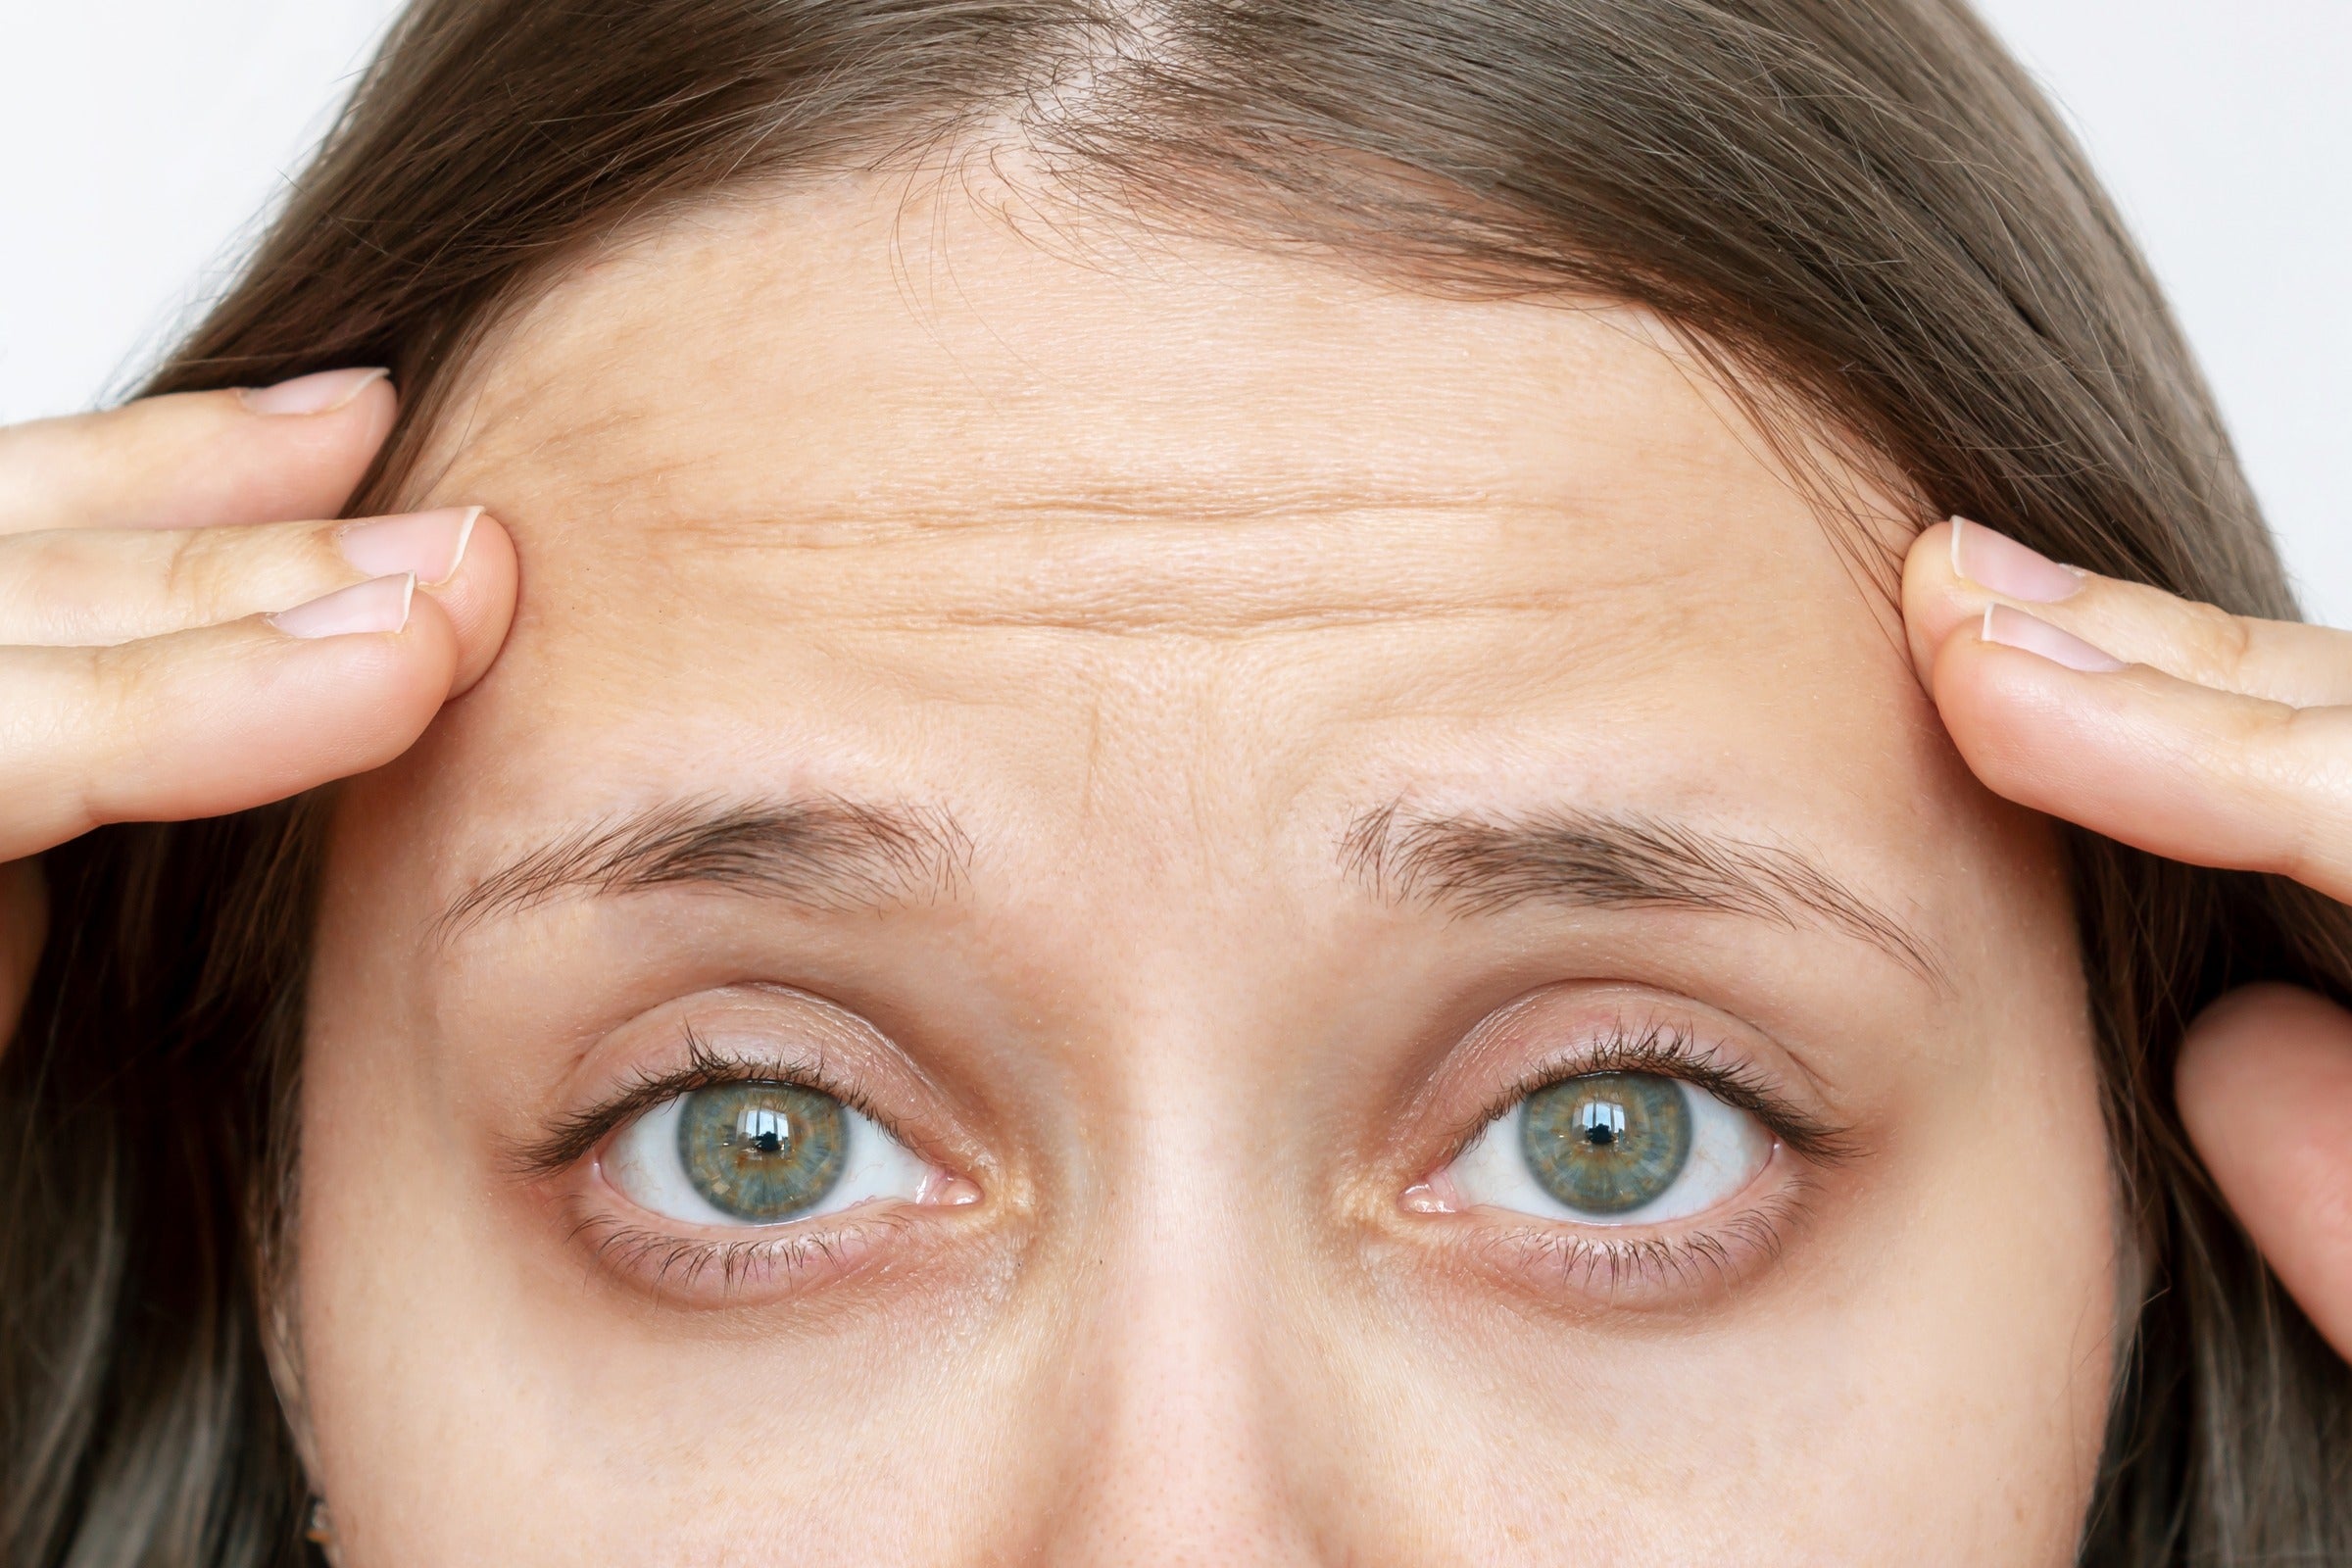 The long-term impact of Botox on the forehead